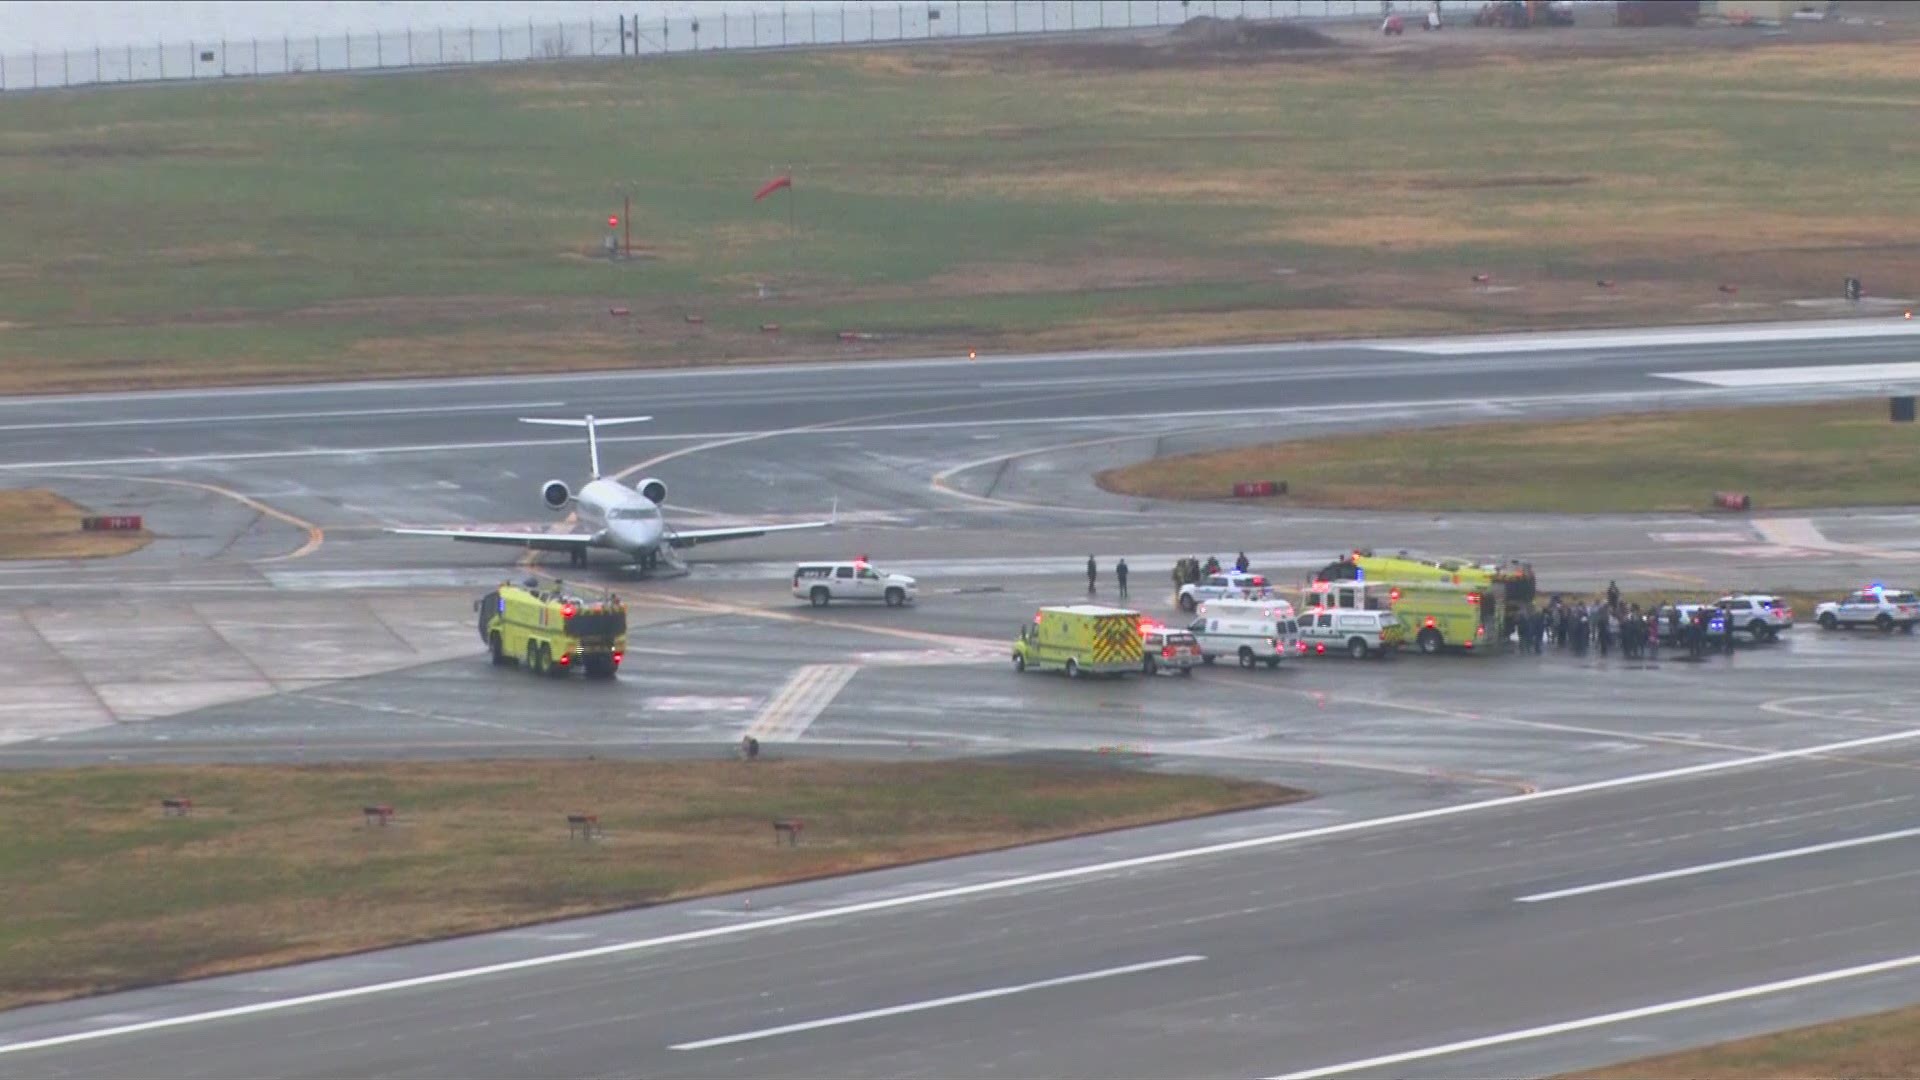 An American Airlines flight from Tallahassee, Florida was evacuated at Ronald Reagan airport for reports of smoke in the cabin.